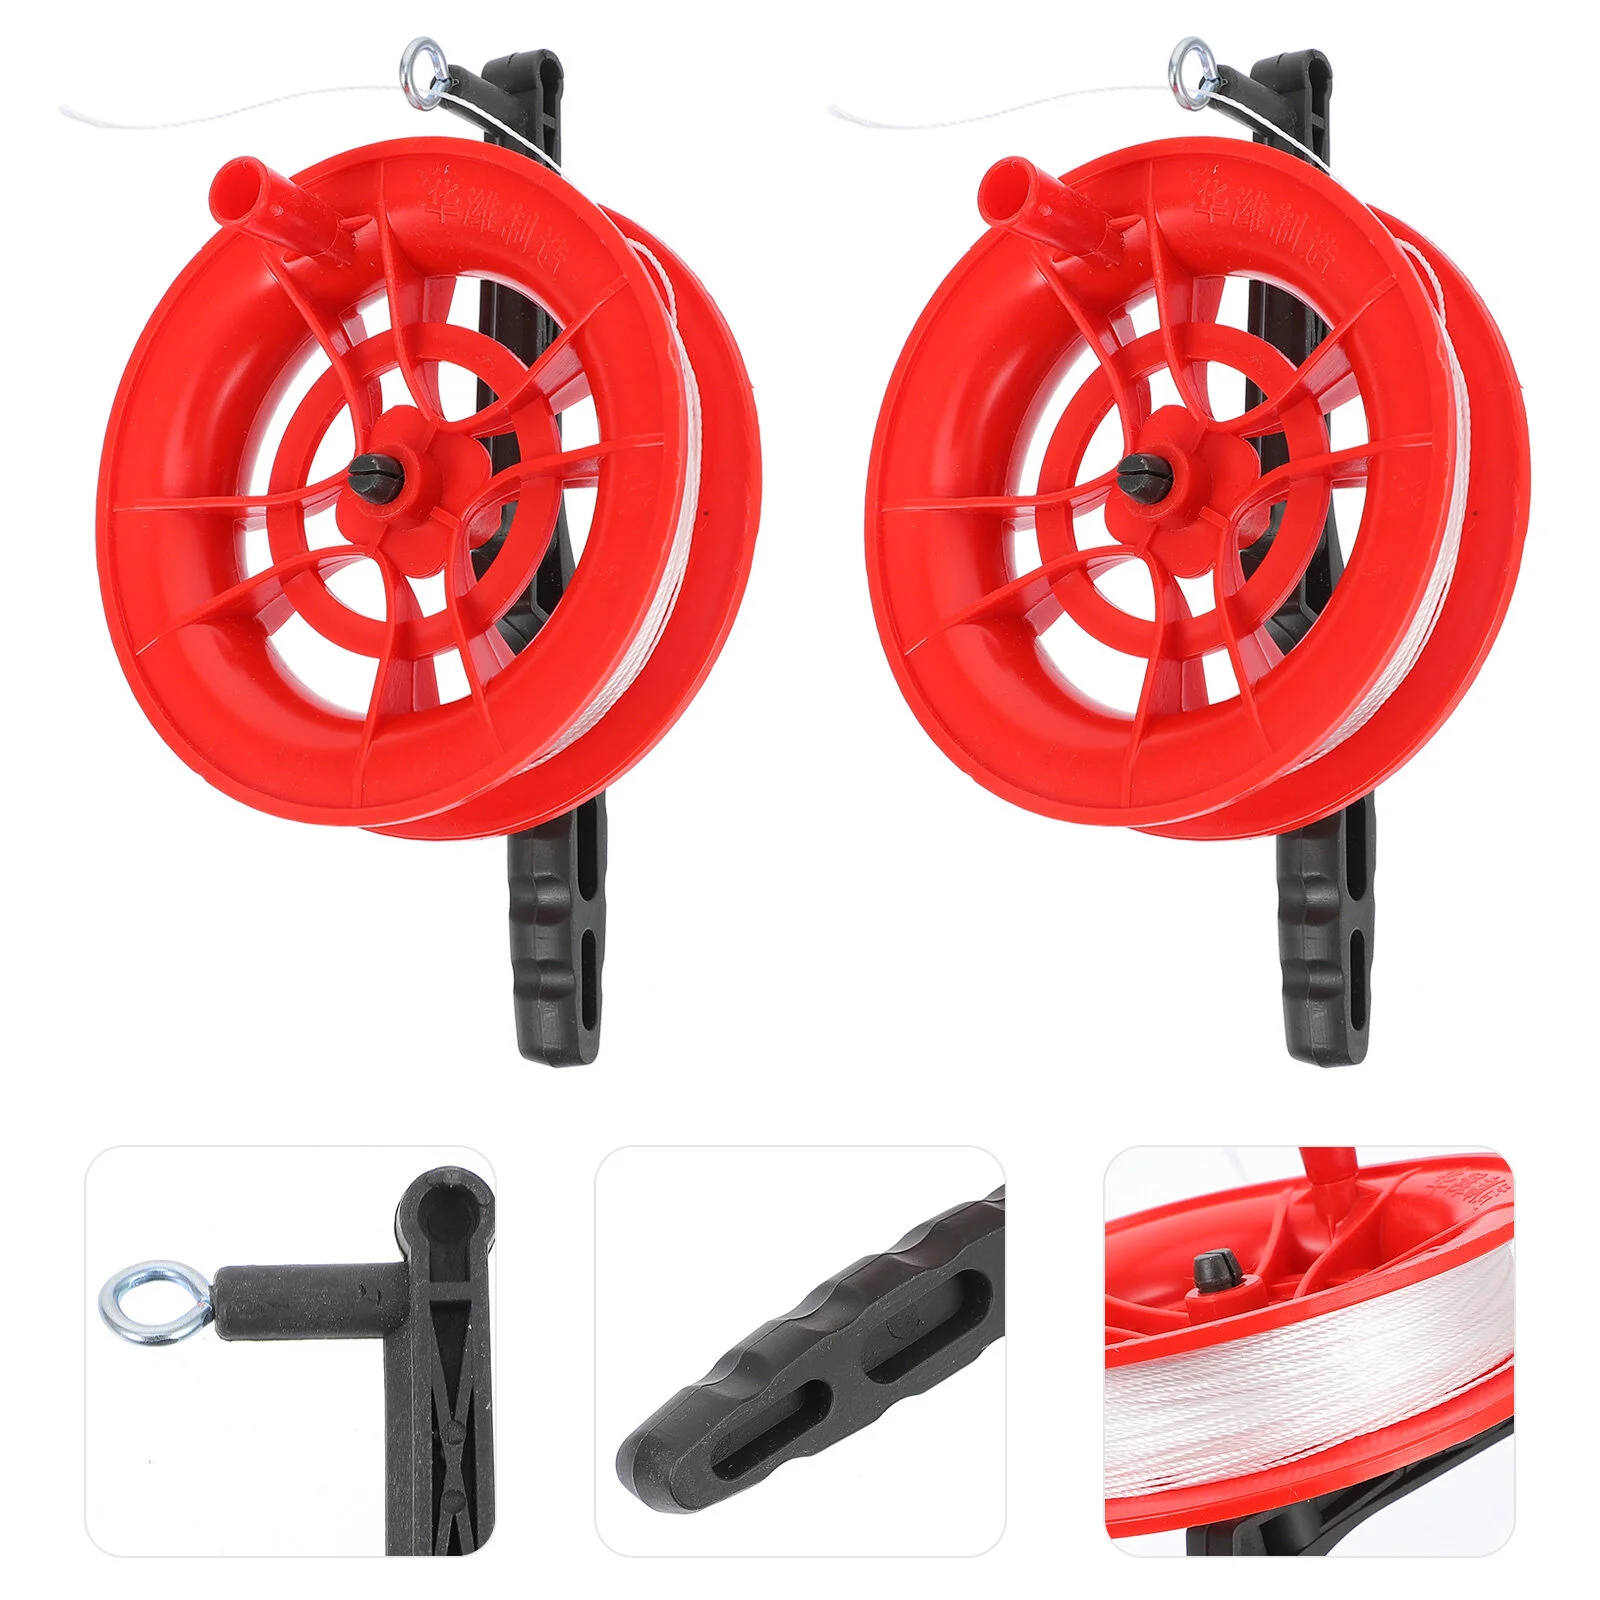 

2pcs Kite String with Reel Kite String Winder Wheel Hand Flying Reel Accessories for Kids Outdoor Game 100m